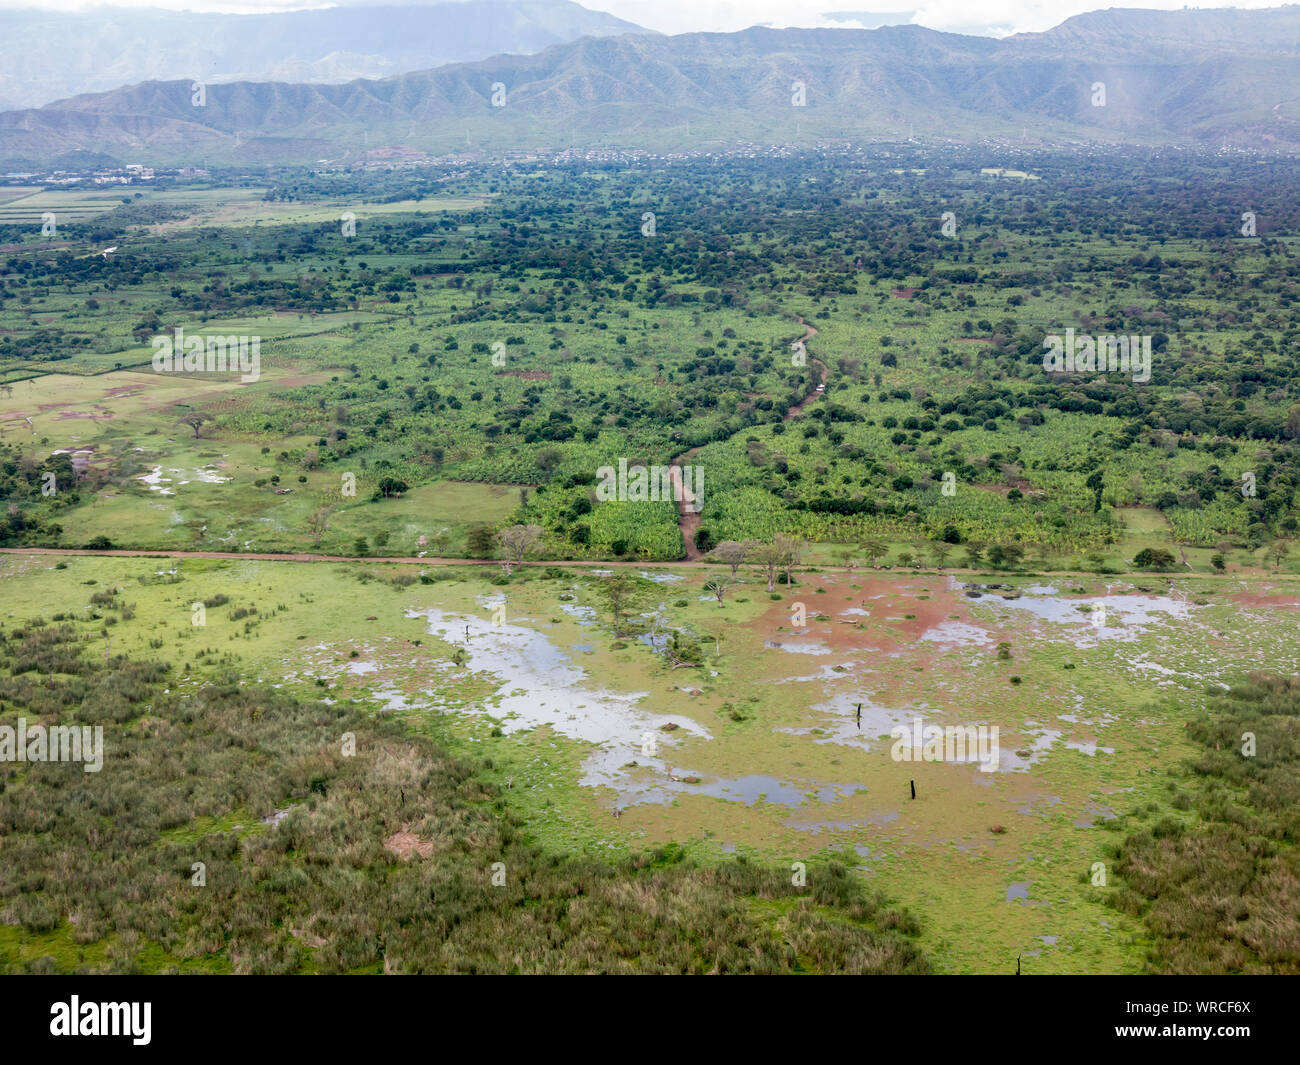 Aerial view of banana plantations and forest in the rift valley near Arba Minch, Ethiopia. Stock Photo